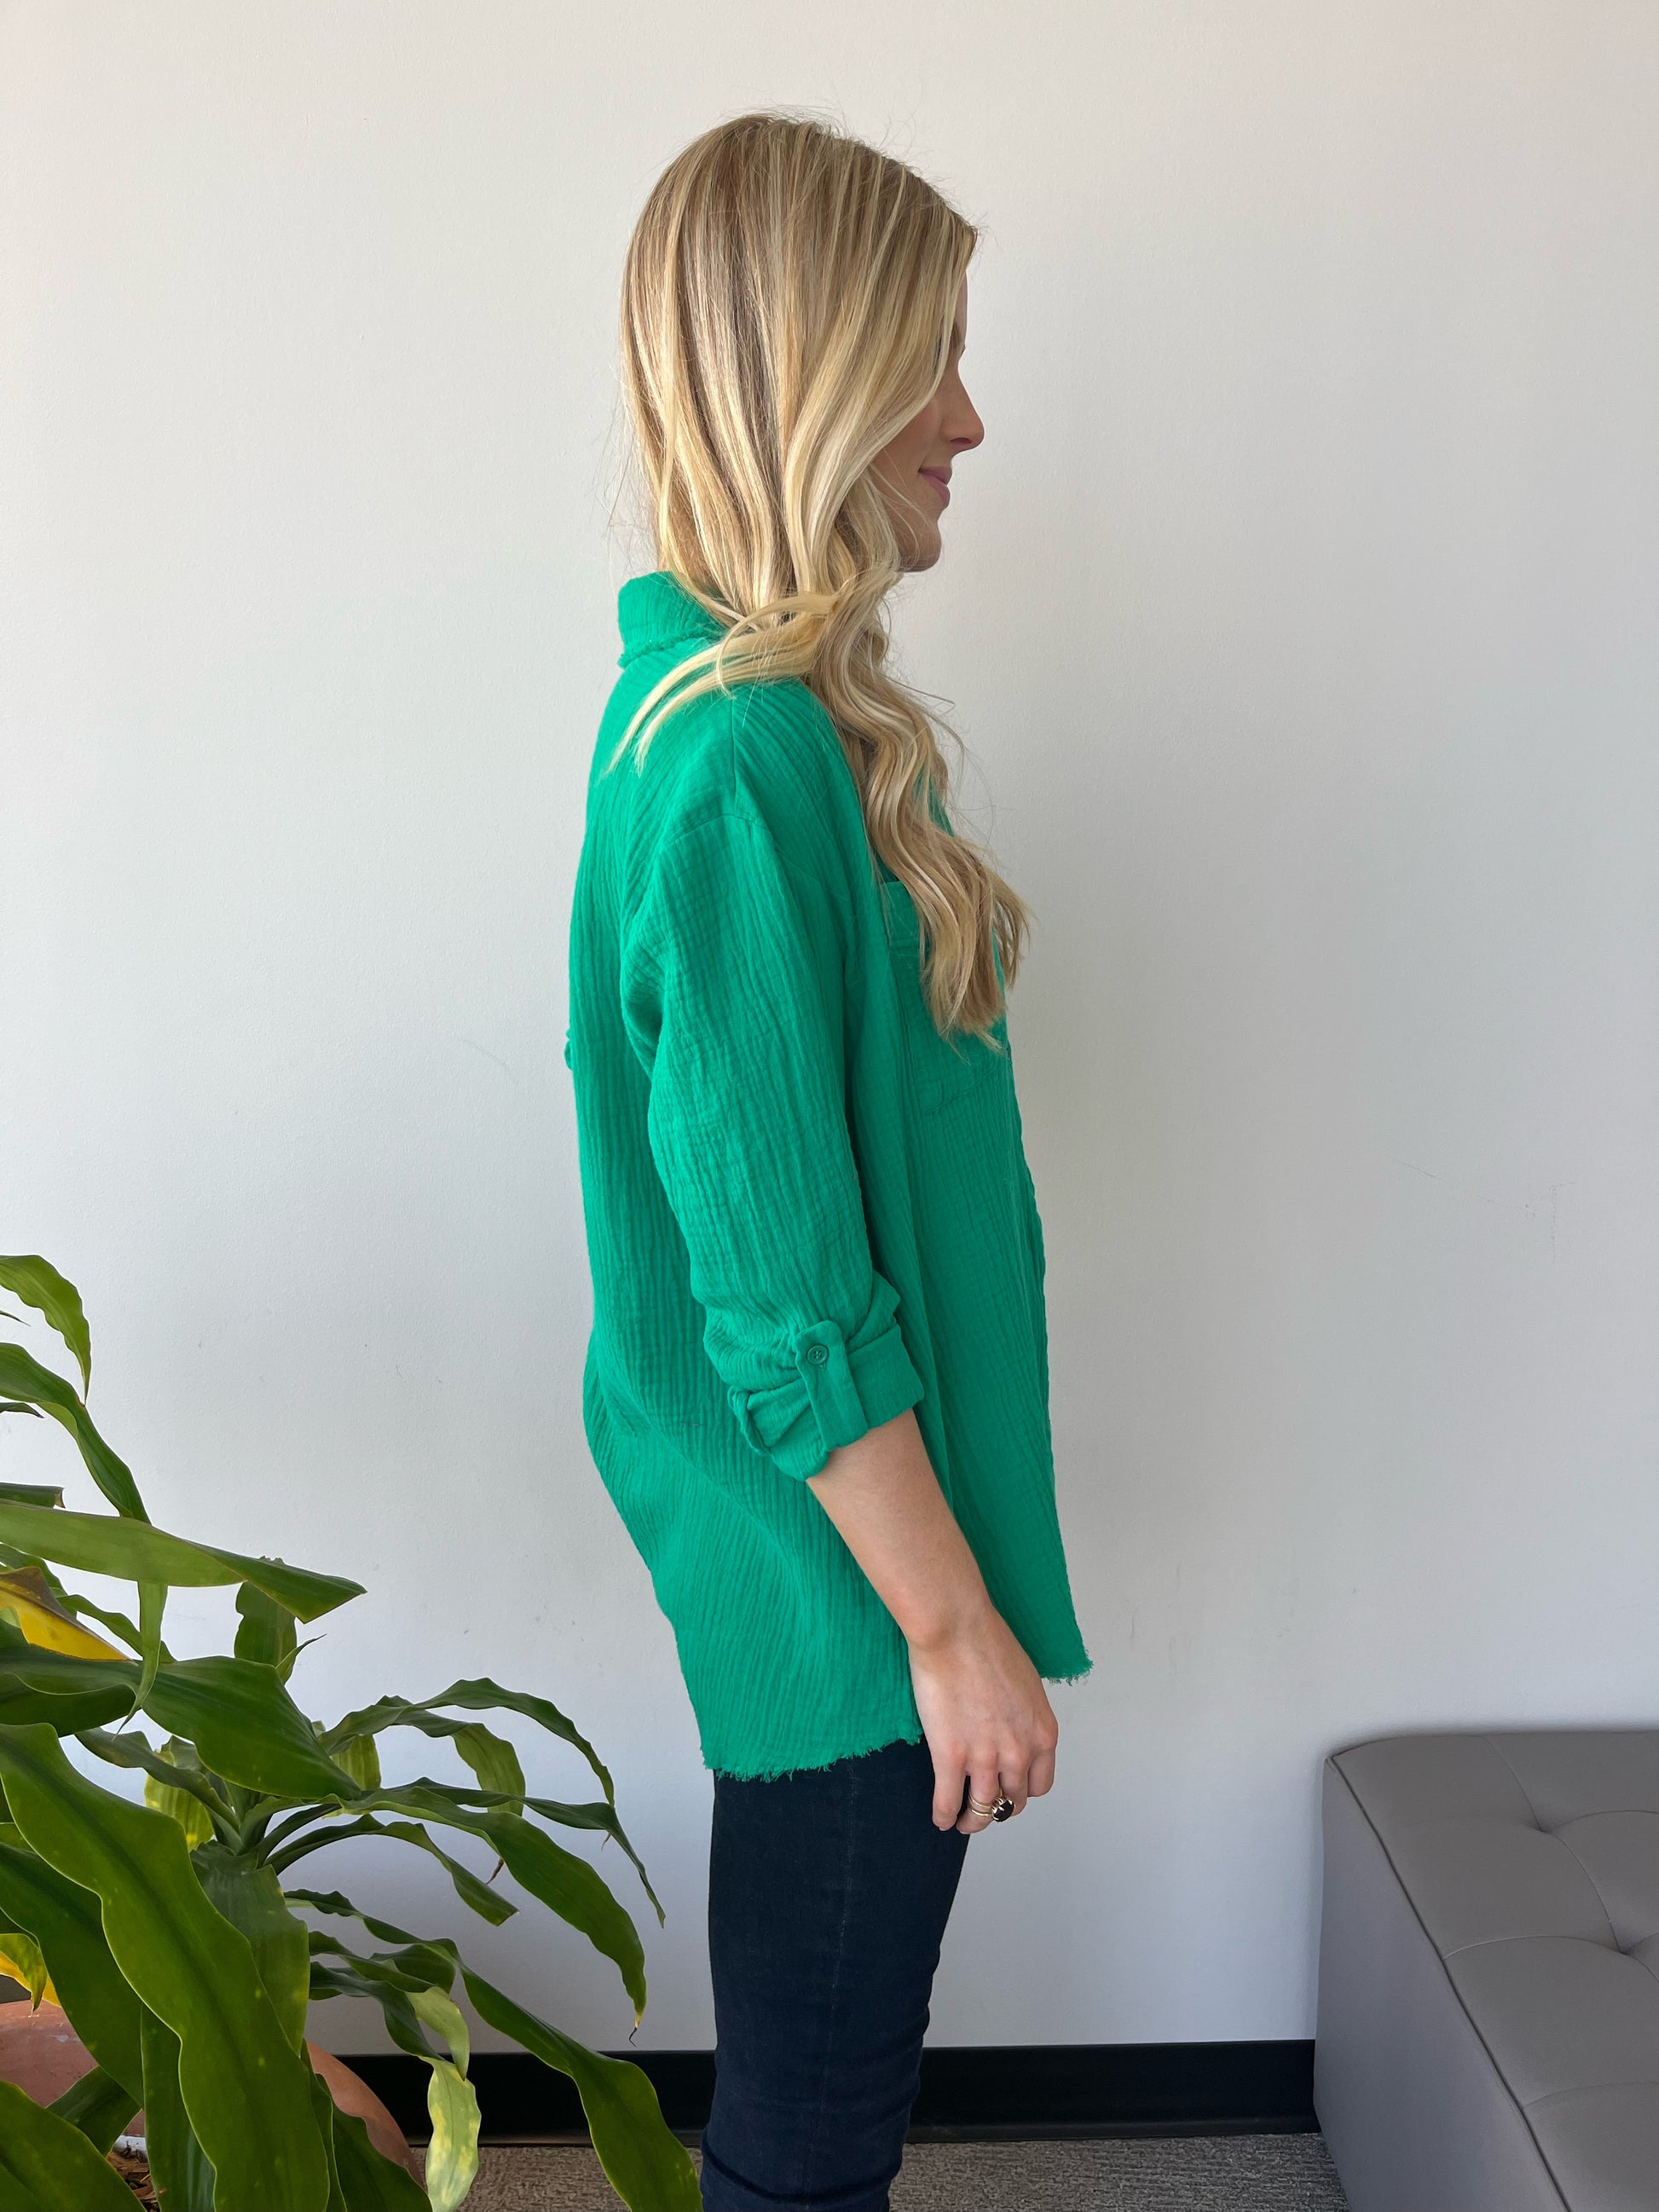 Versatile Oversized Green Gauze Shirt: Button front, adjustable sleeves. Perfect for leggings and sneakers or as a beach cover-up. Very oversized fit for relaxed style. Lightweight and comfortable for all-day wear.